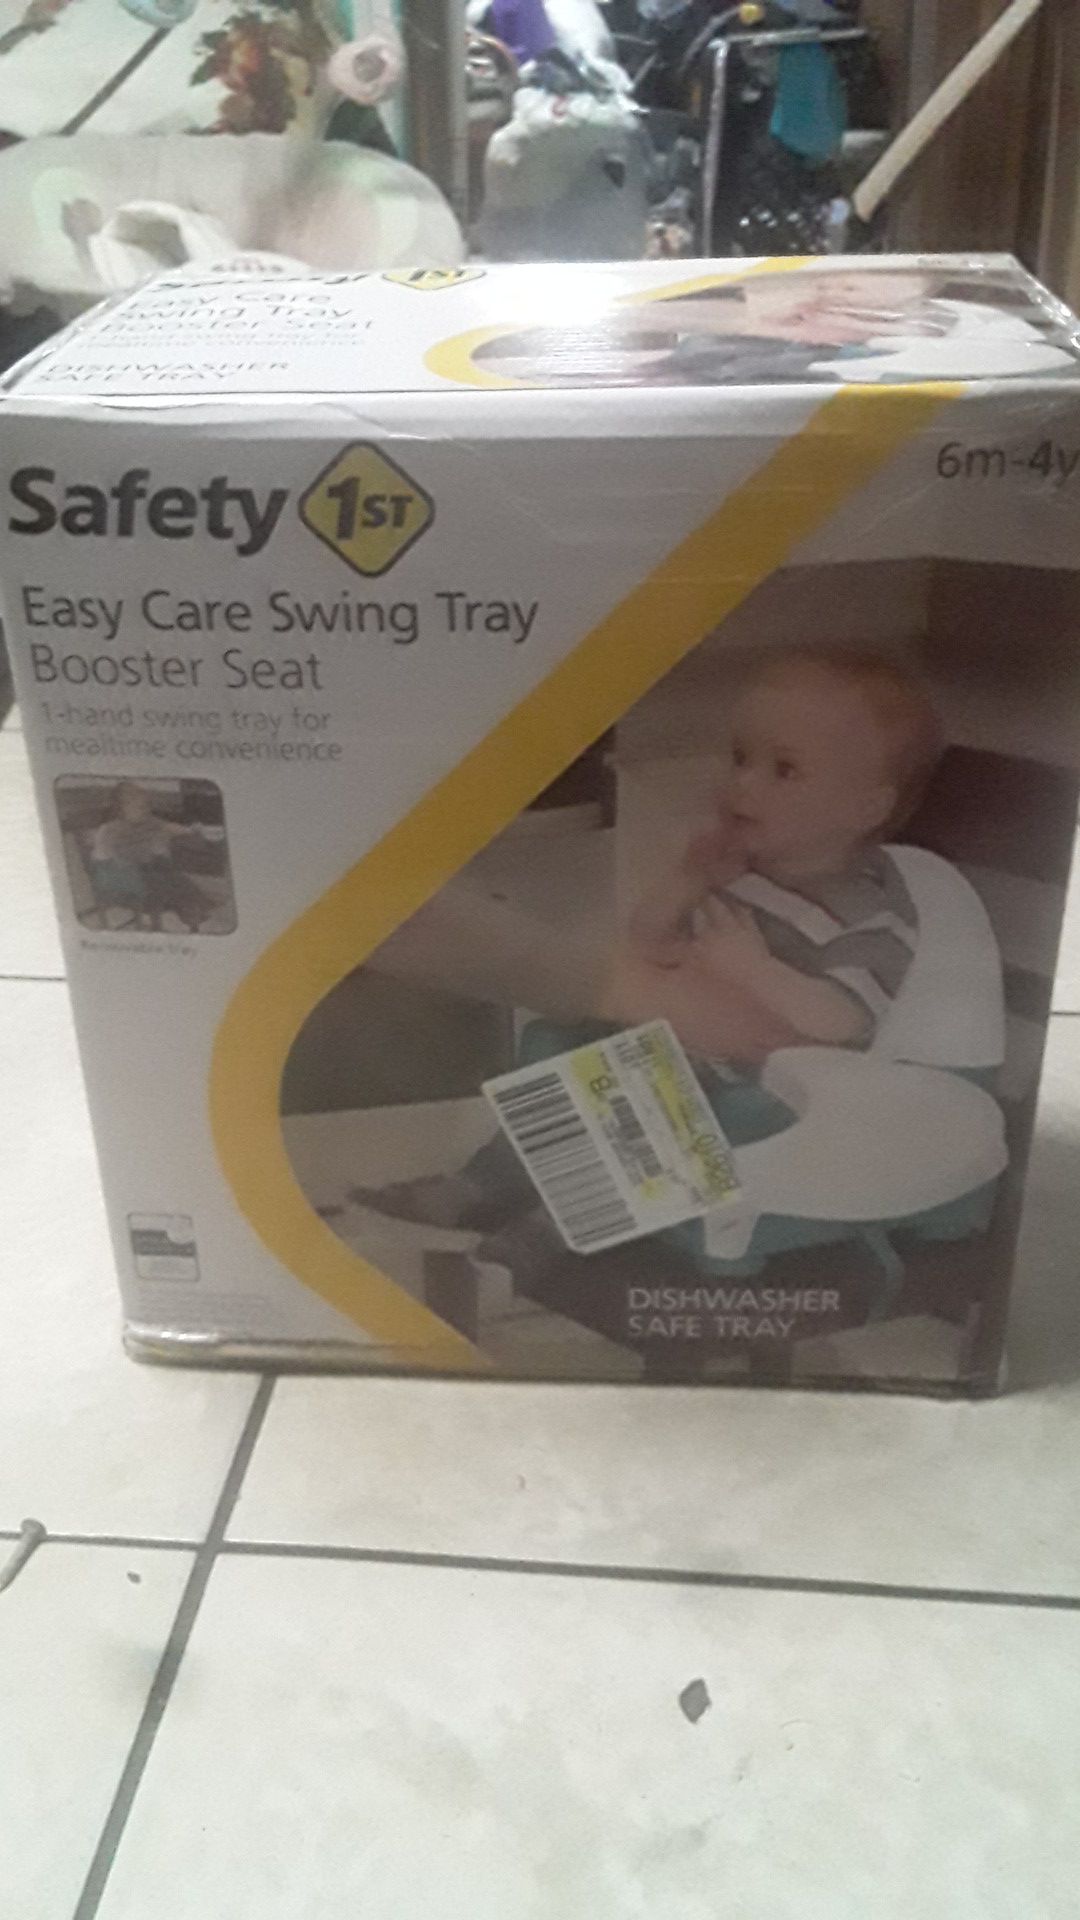 Easy care swing tray booster seat